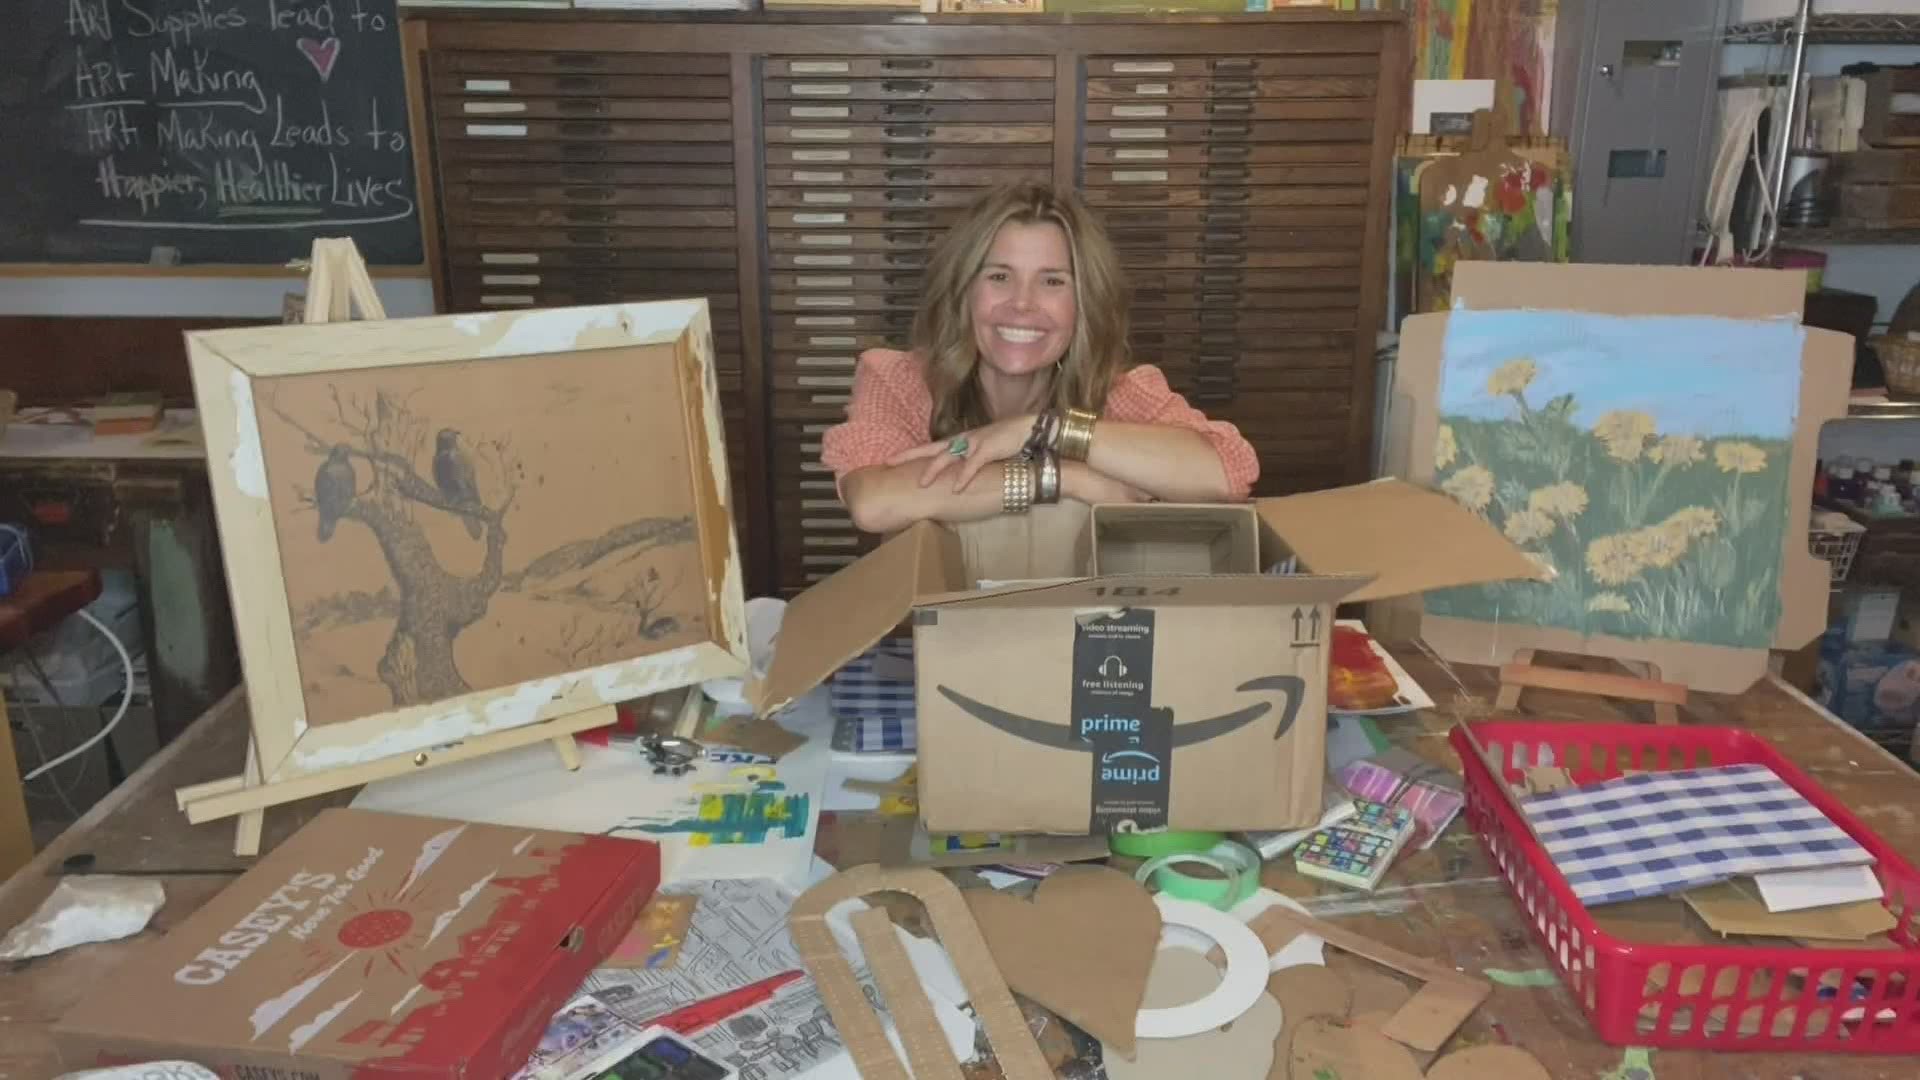 Michele shows us how to be creative with cardboard on 'Iowa Live'